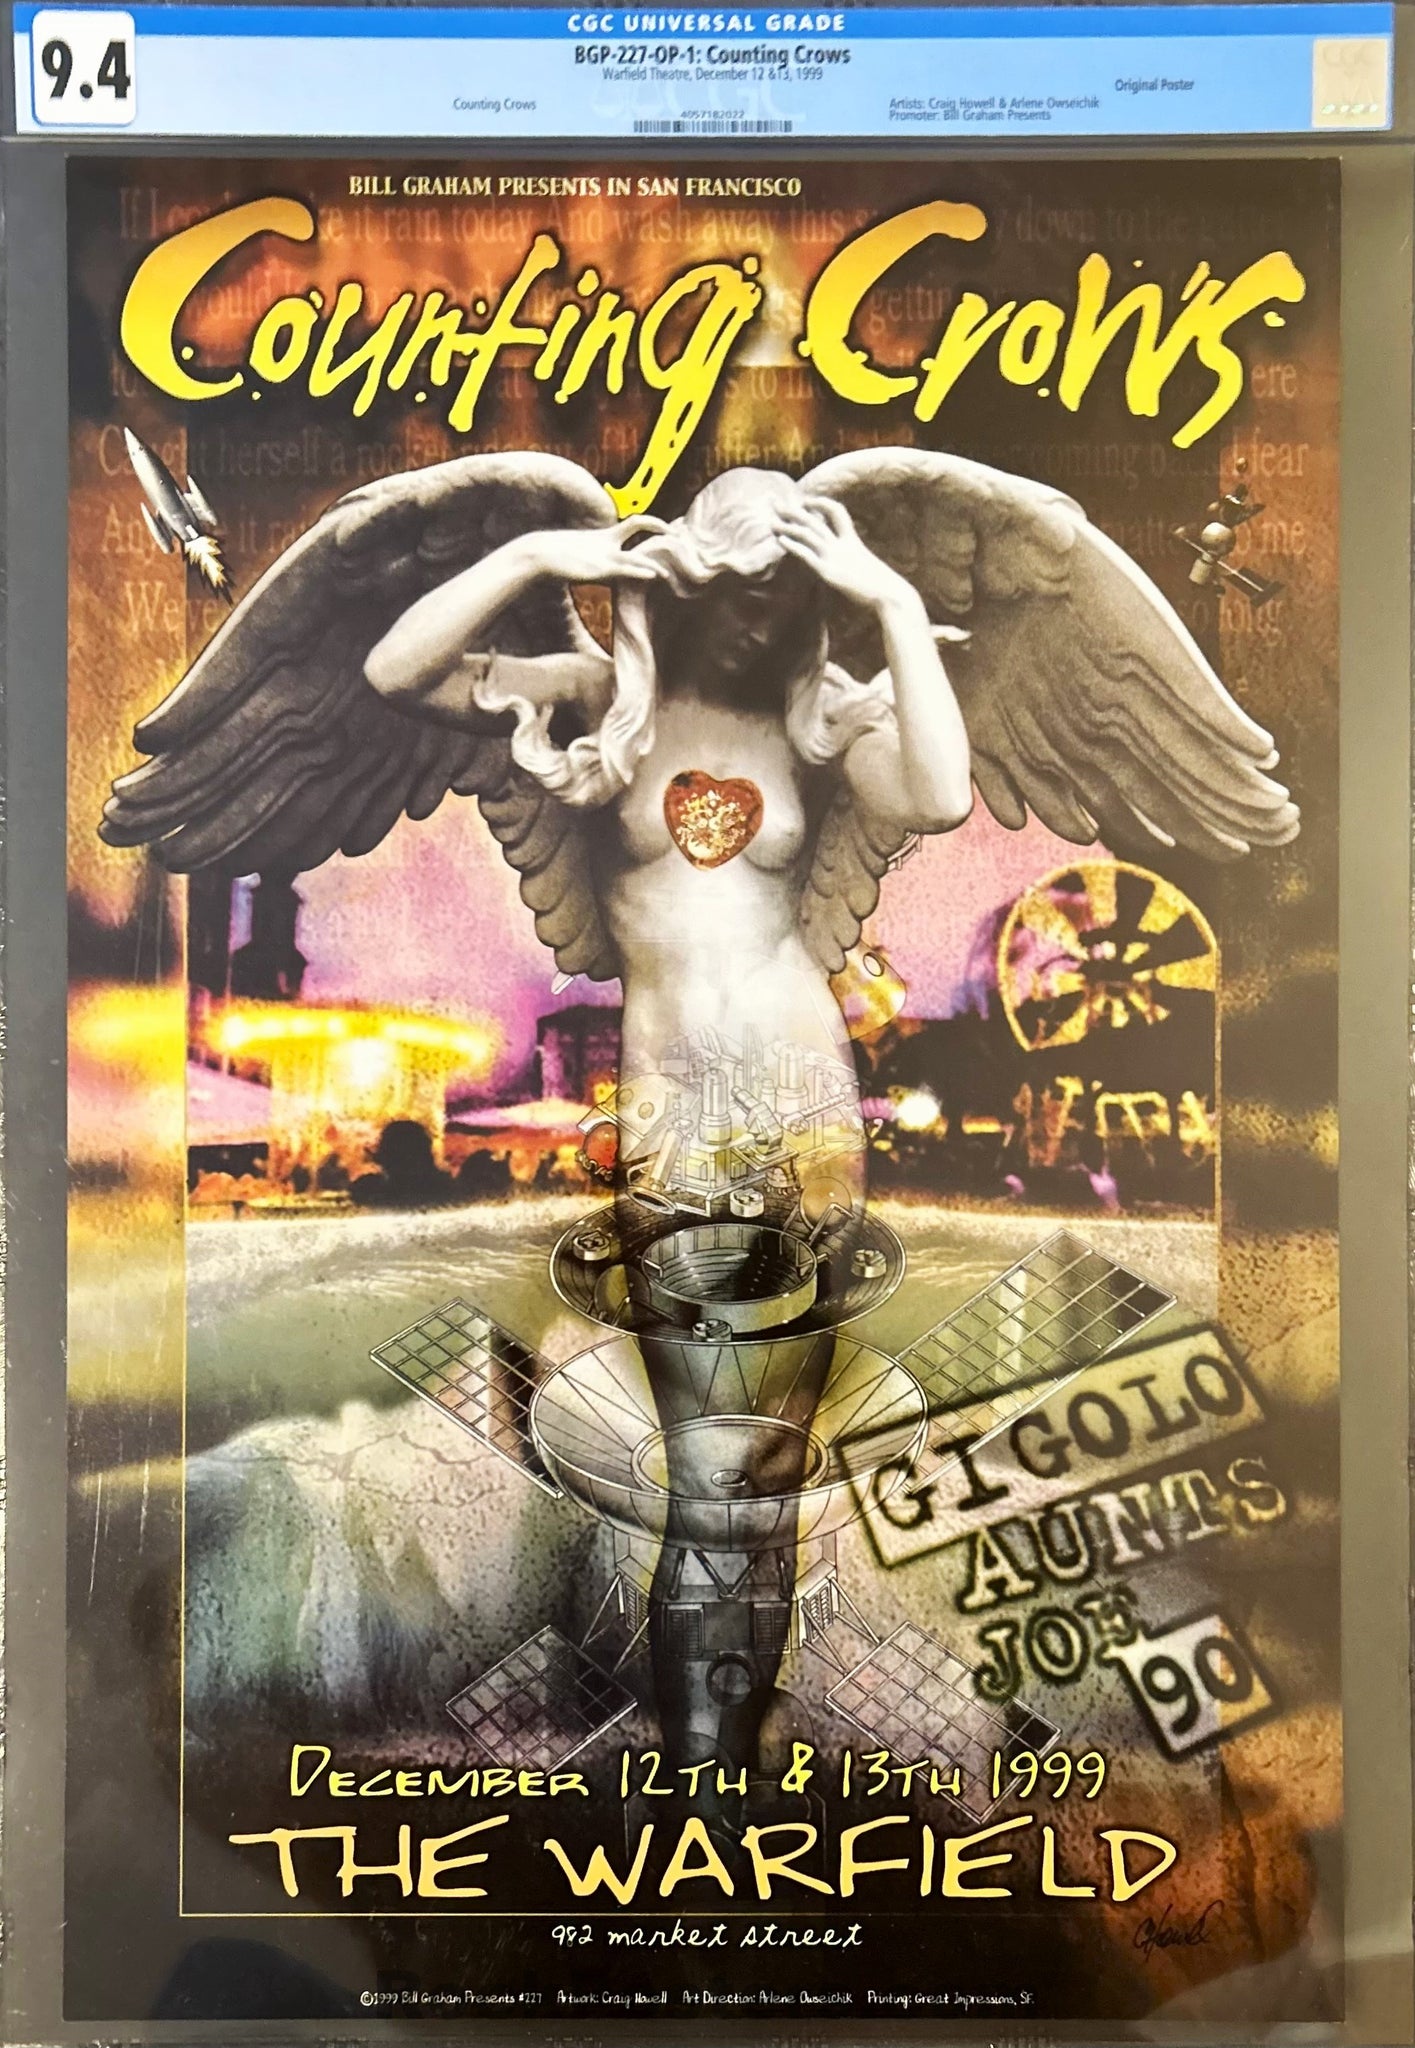 BGP-227 - Counting Crows - 1999 Poster - Warfield Theater - CGC Graded 9.4